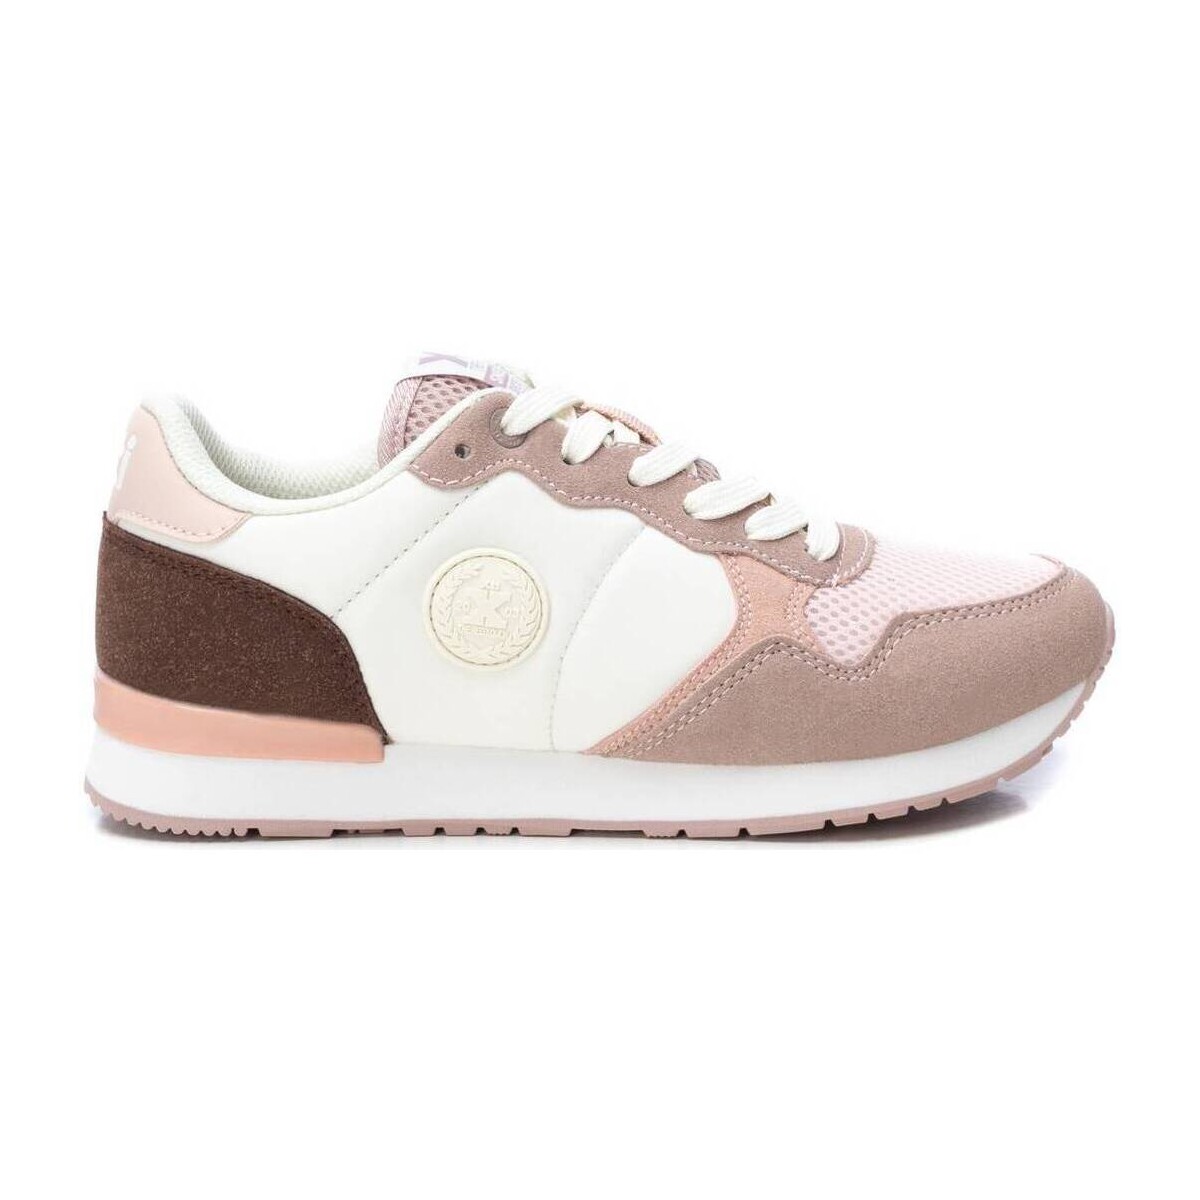 Chaussures Femme Baskets mode Xti 14081109 Rose